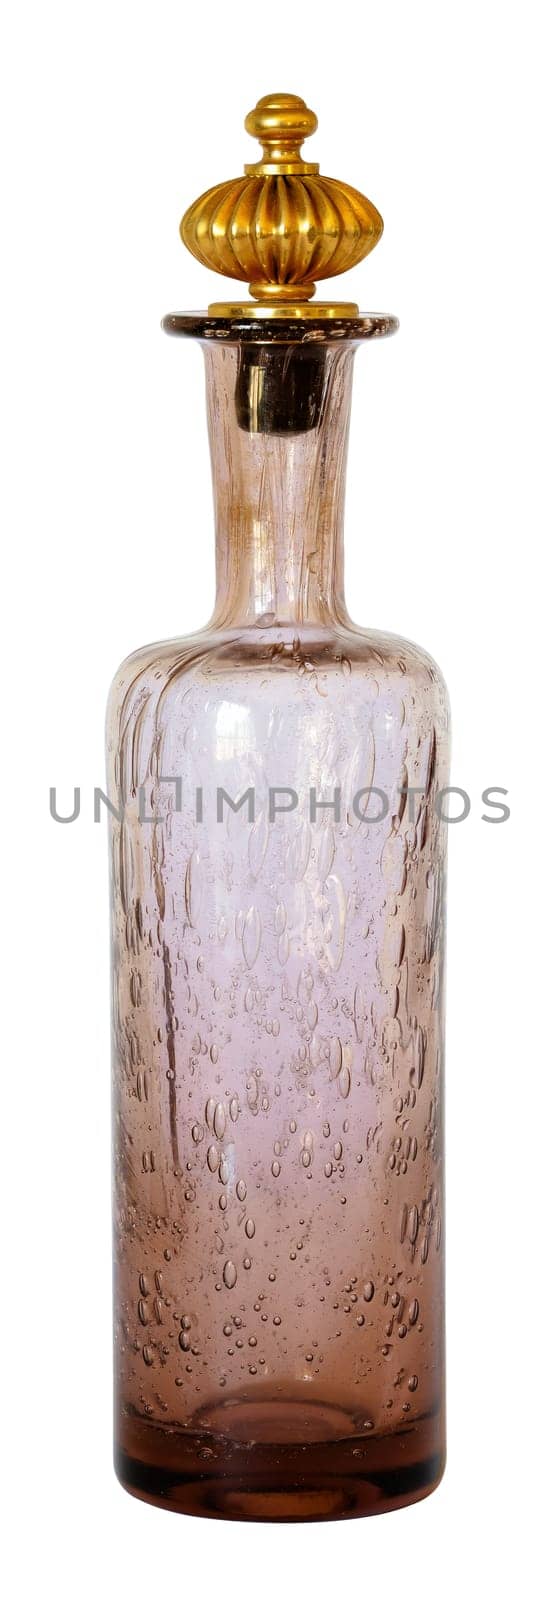 French bottle in pink bubble glass with a large decorative gold stopper isolated on a white background